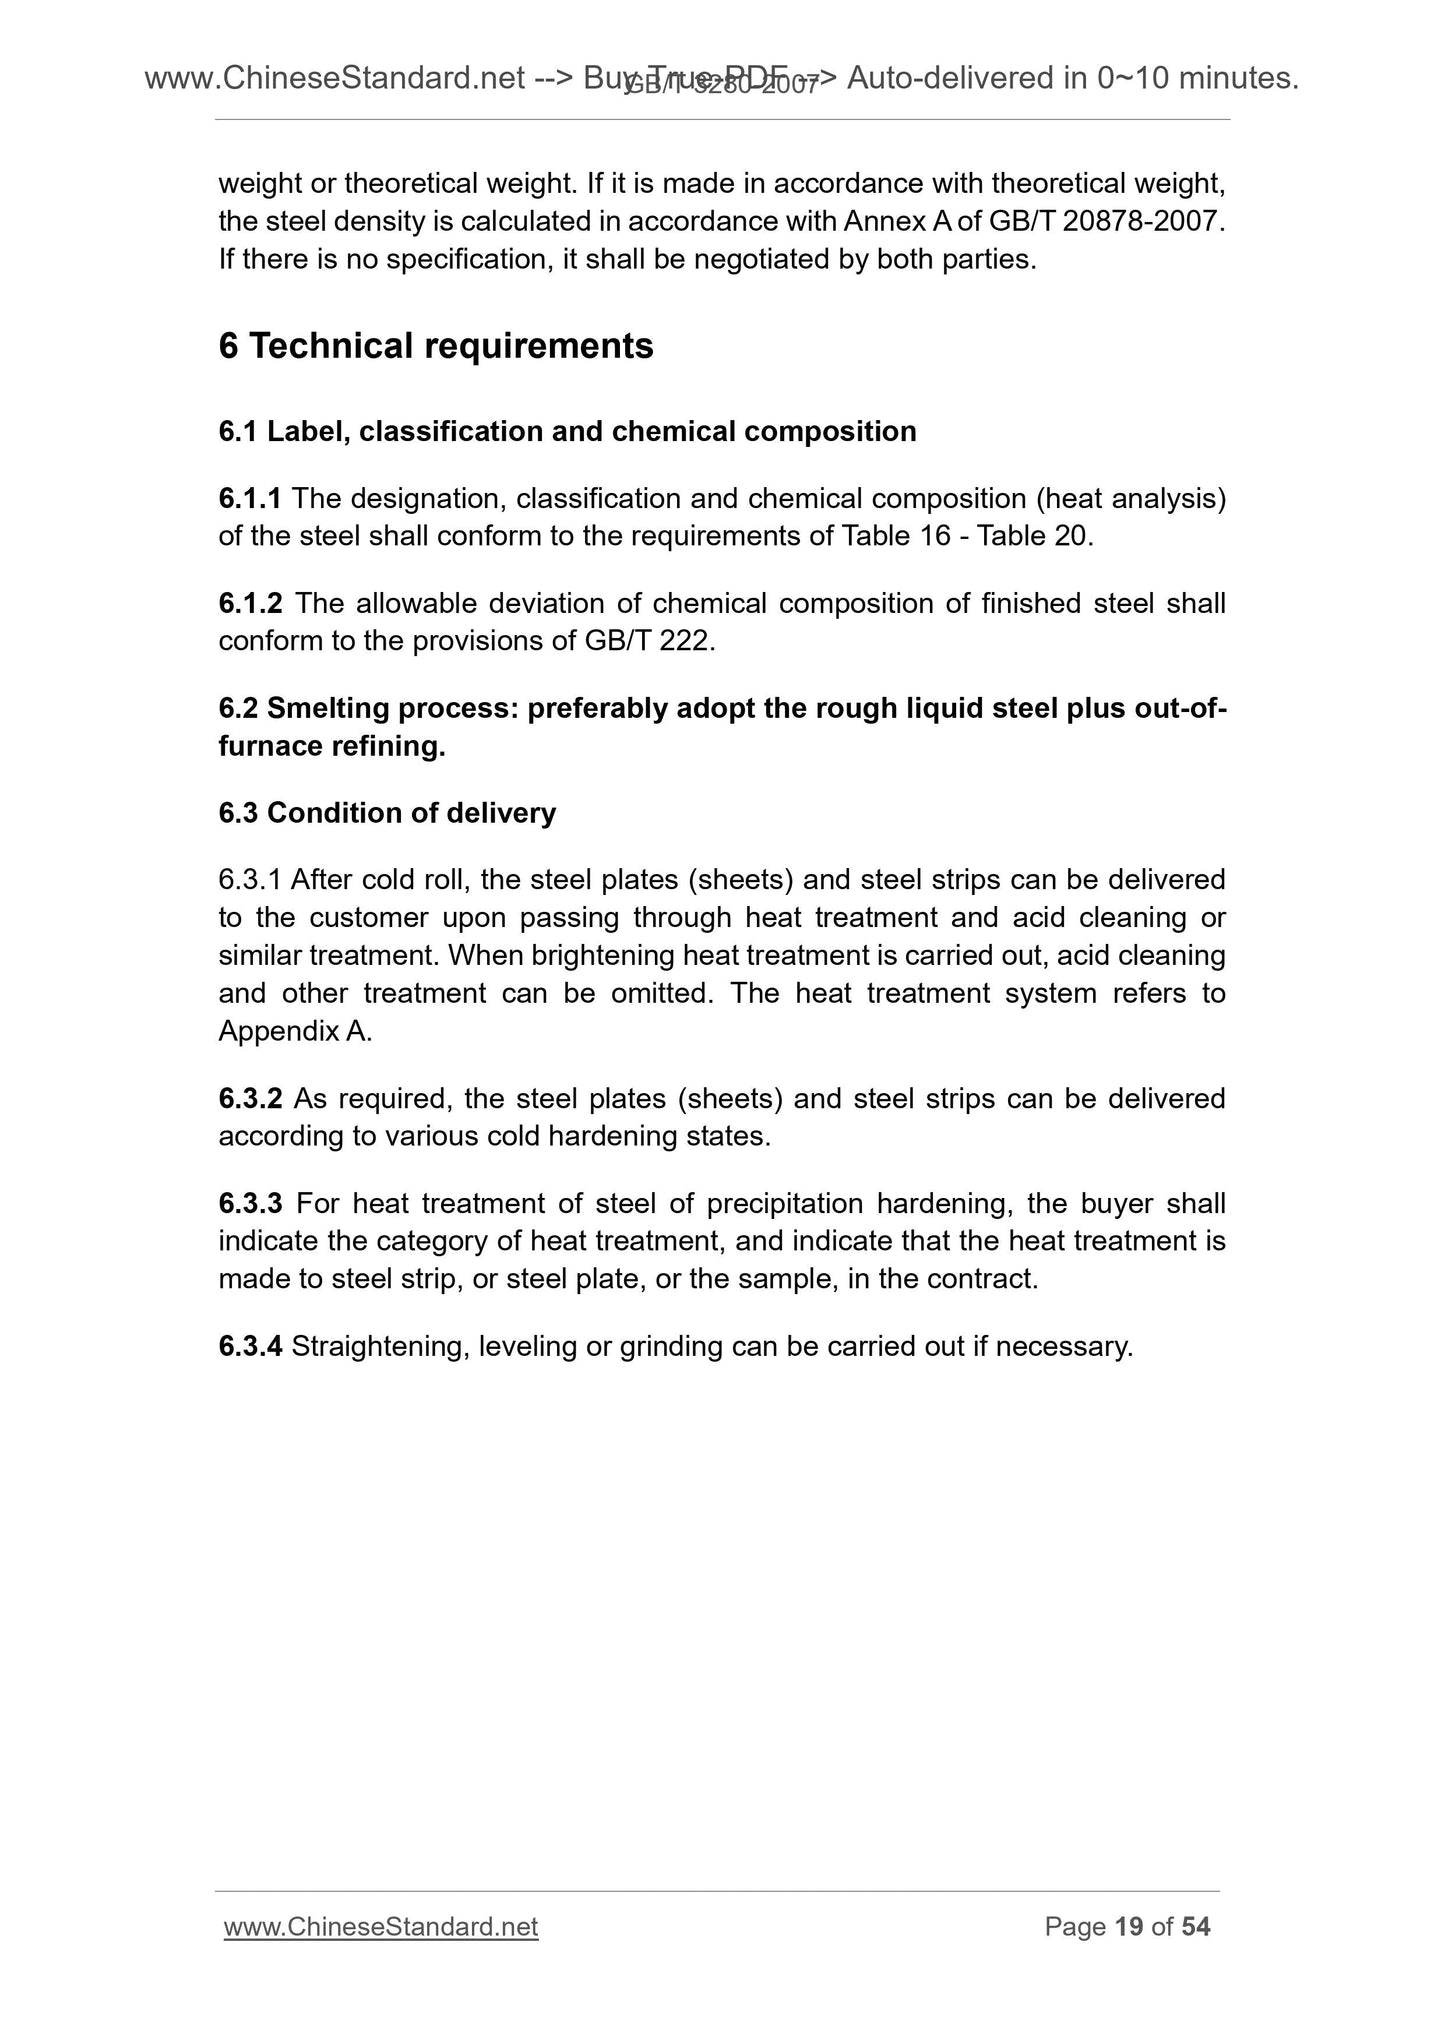 GB/T 3280-2007 Page 12